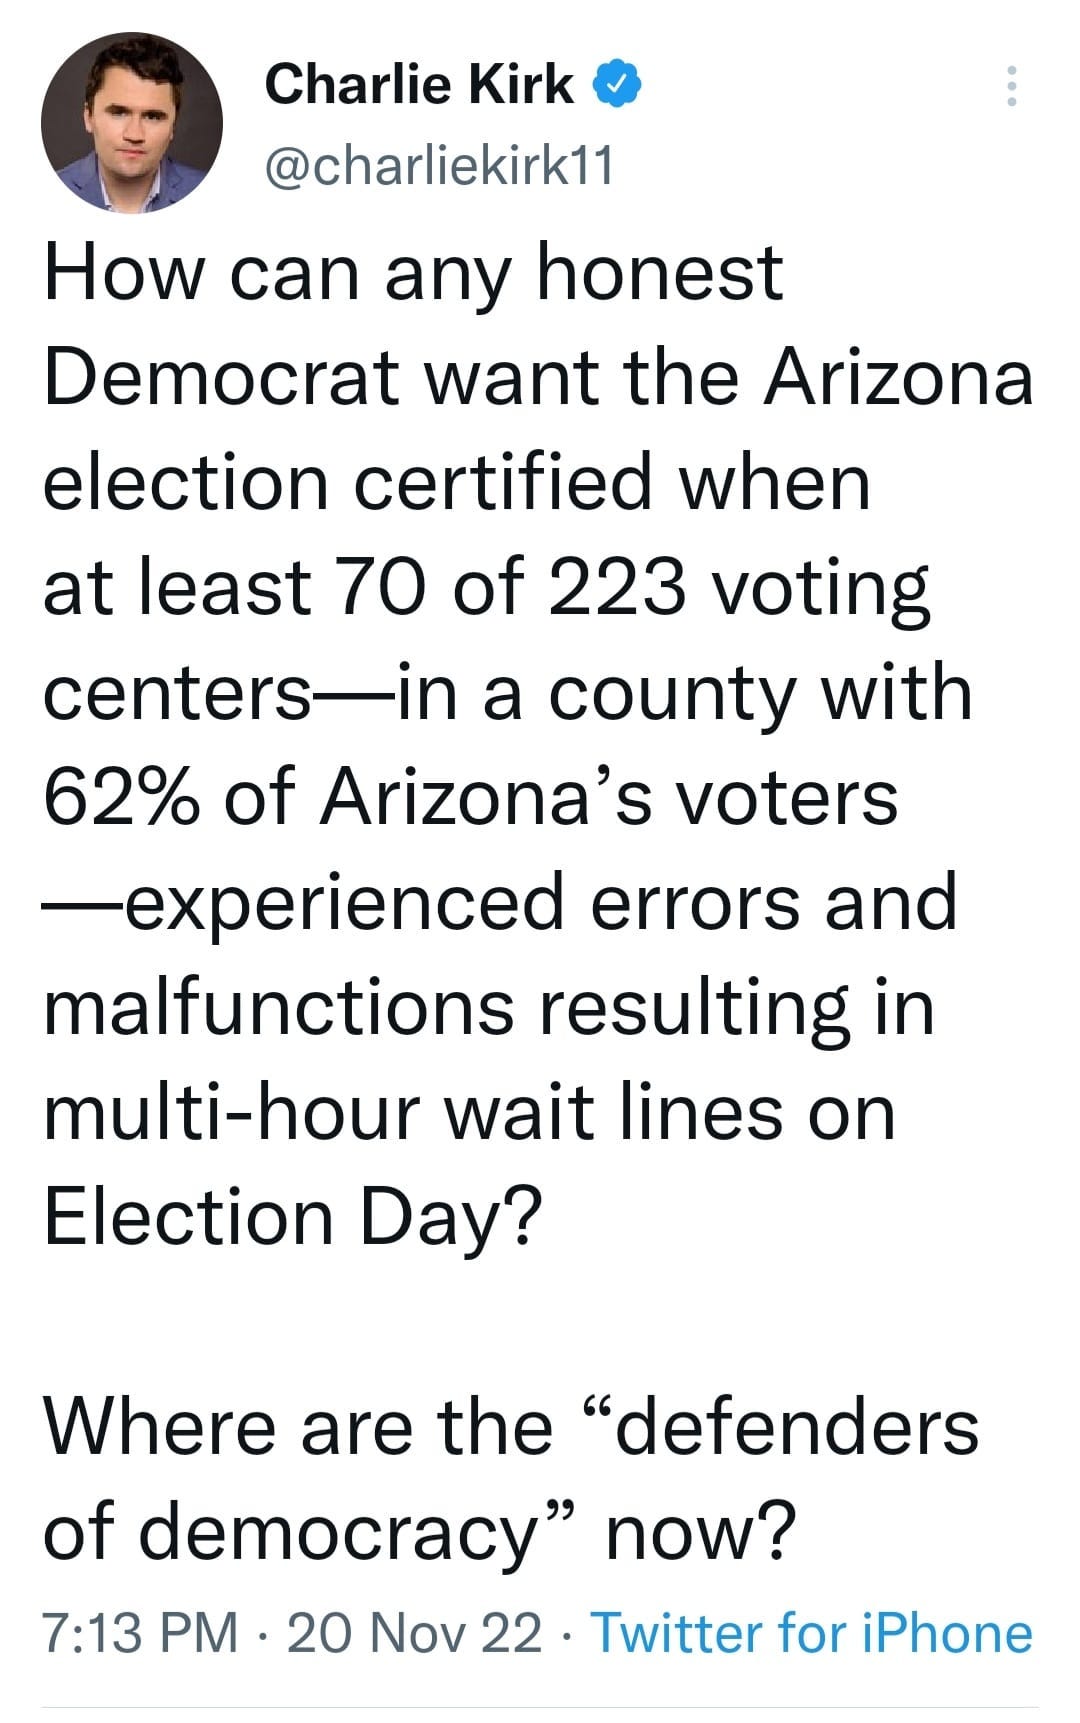 May be an image of 1 person and text that says 'Charlie Kirk @charliekirk11 How can any honest Democrat want the Arizona election certified when at least 70 of 223 voting centers- a county with 62% of Arizona's voters -experienced errors and malfunctions resulting in multi-hour wait ines on Election Day? Where are the "defenders of democracy" now? 7:13 PM 20 Nov 22 Twitter for iPhone'